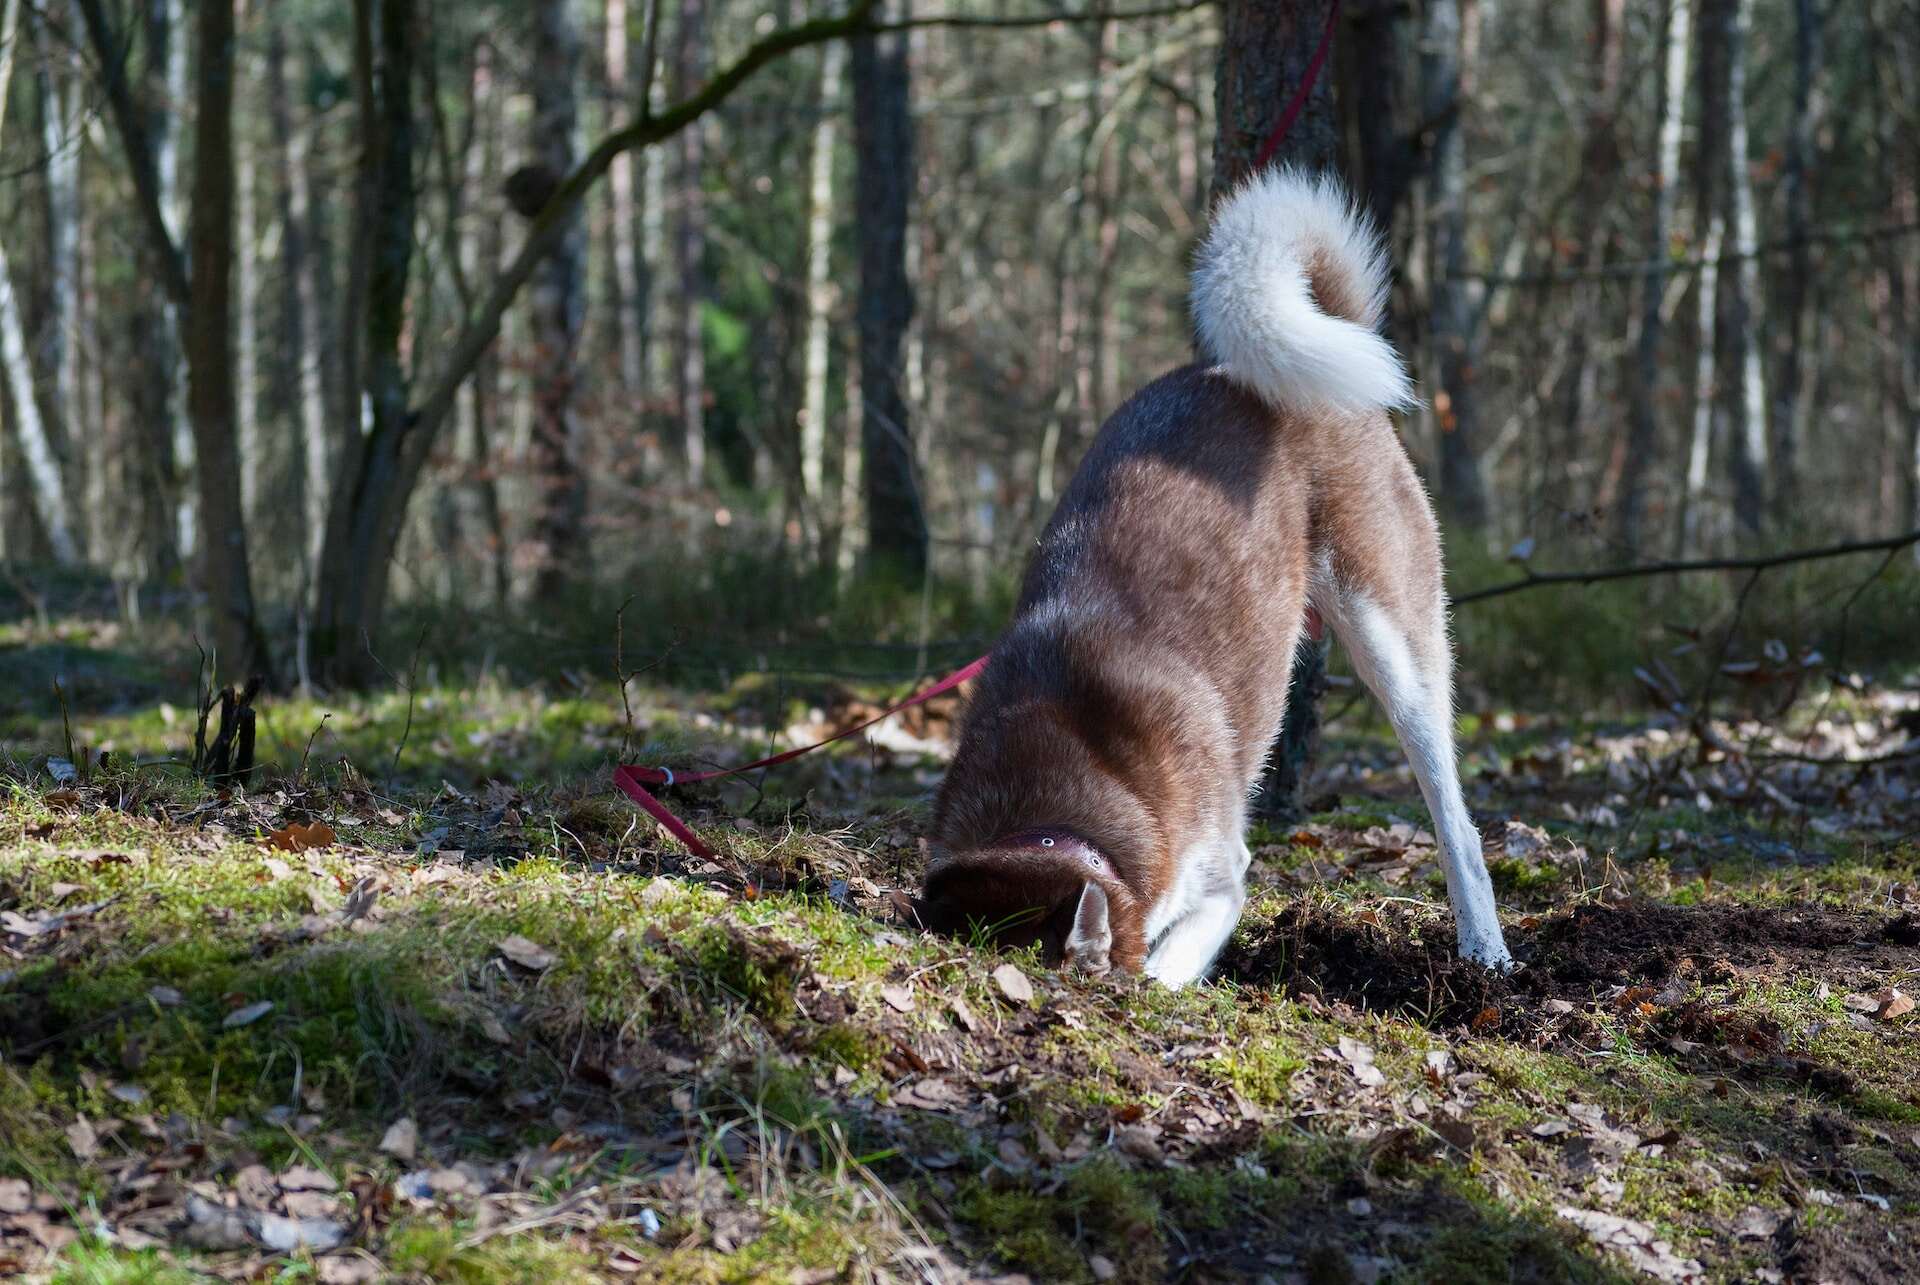 A Husky digging a hole in the ground in a forest